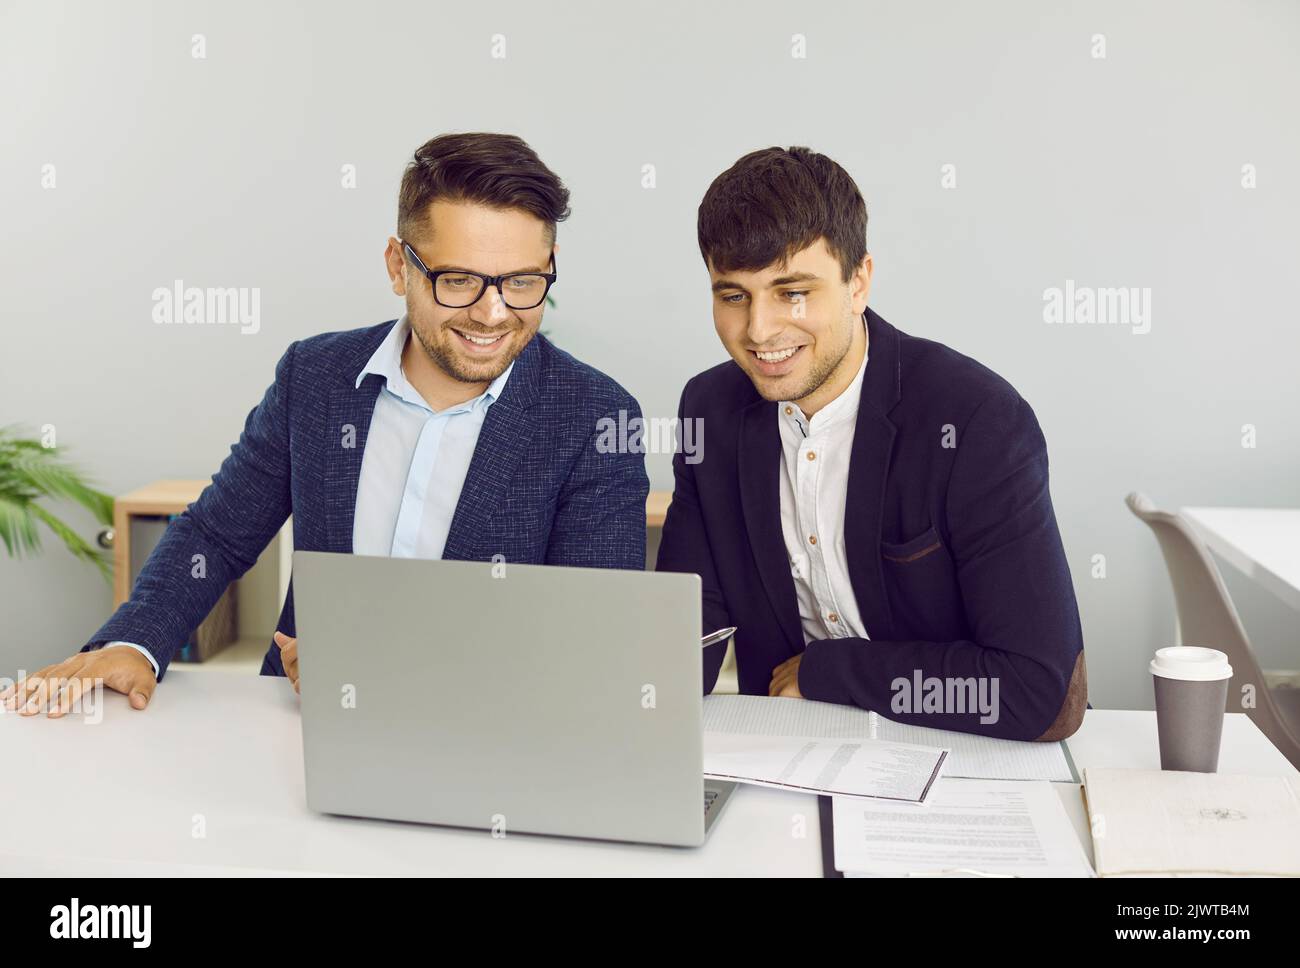 Two friendly male colleagues are working together in office on joint startup project. Stock Photo